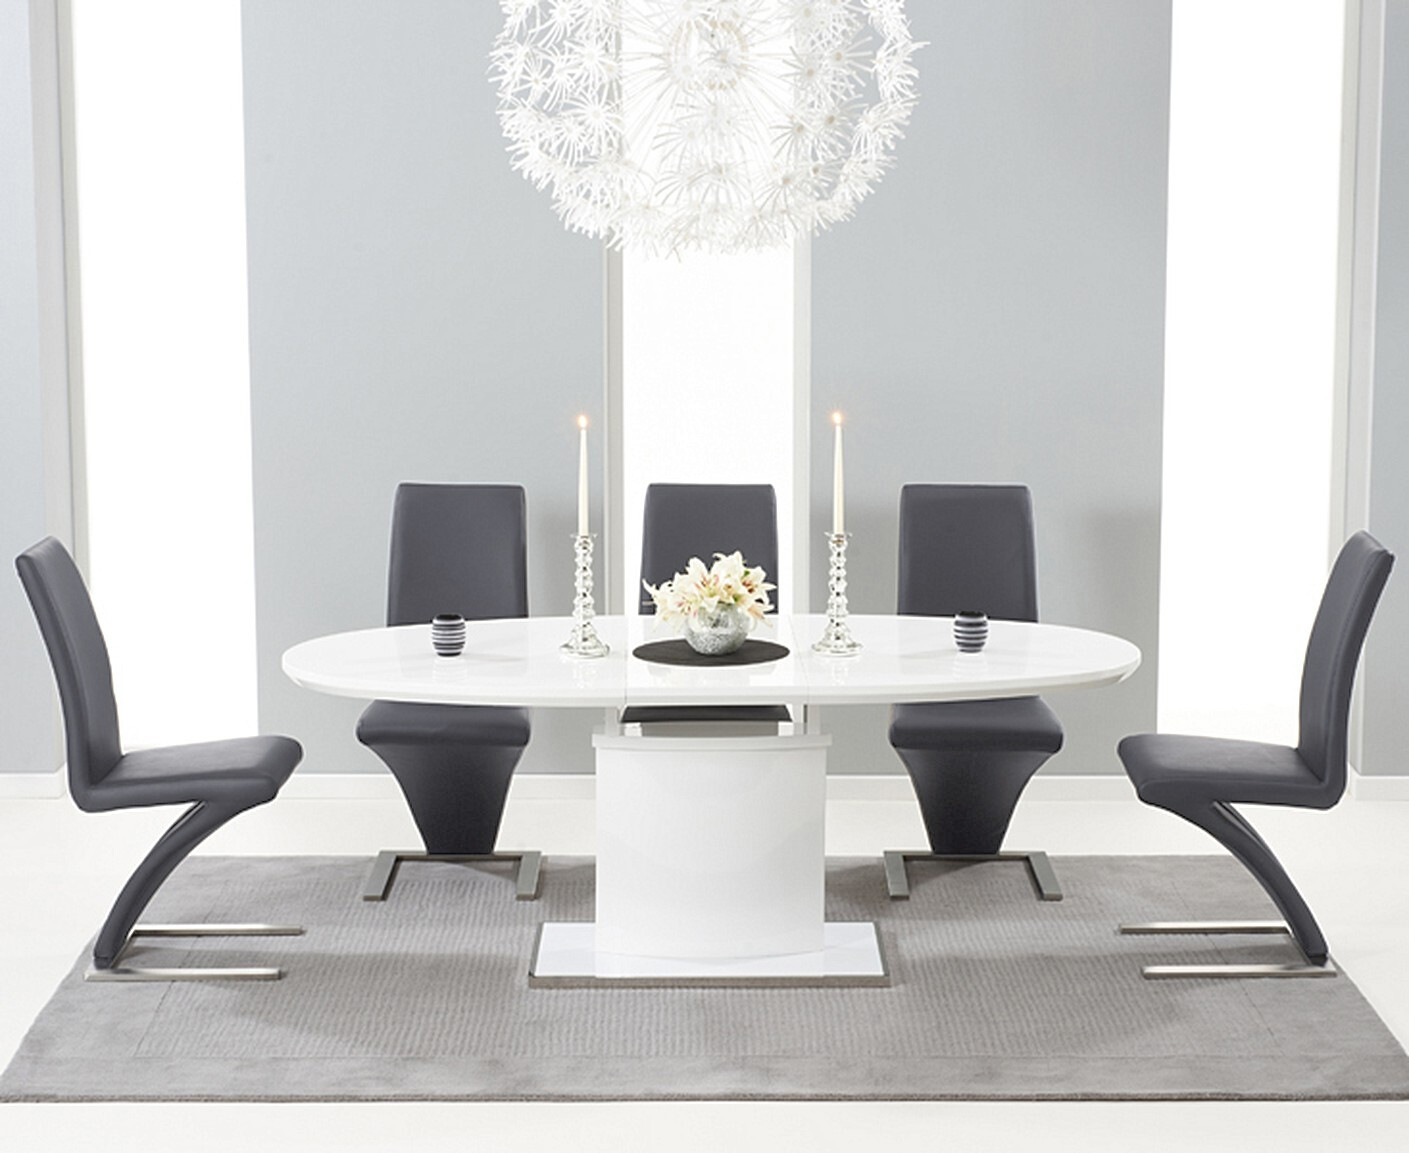 Extending Valzo 160cm White High Gloss Pedestal Dining Table With 4 Grey Aldo Chairs